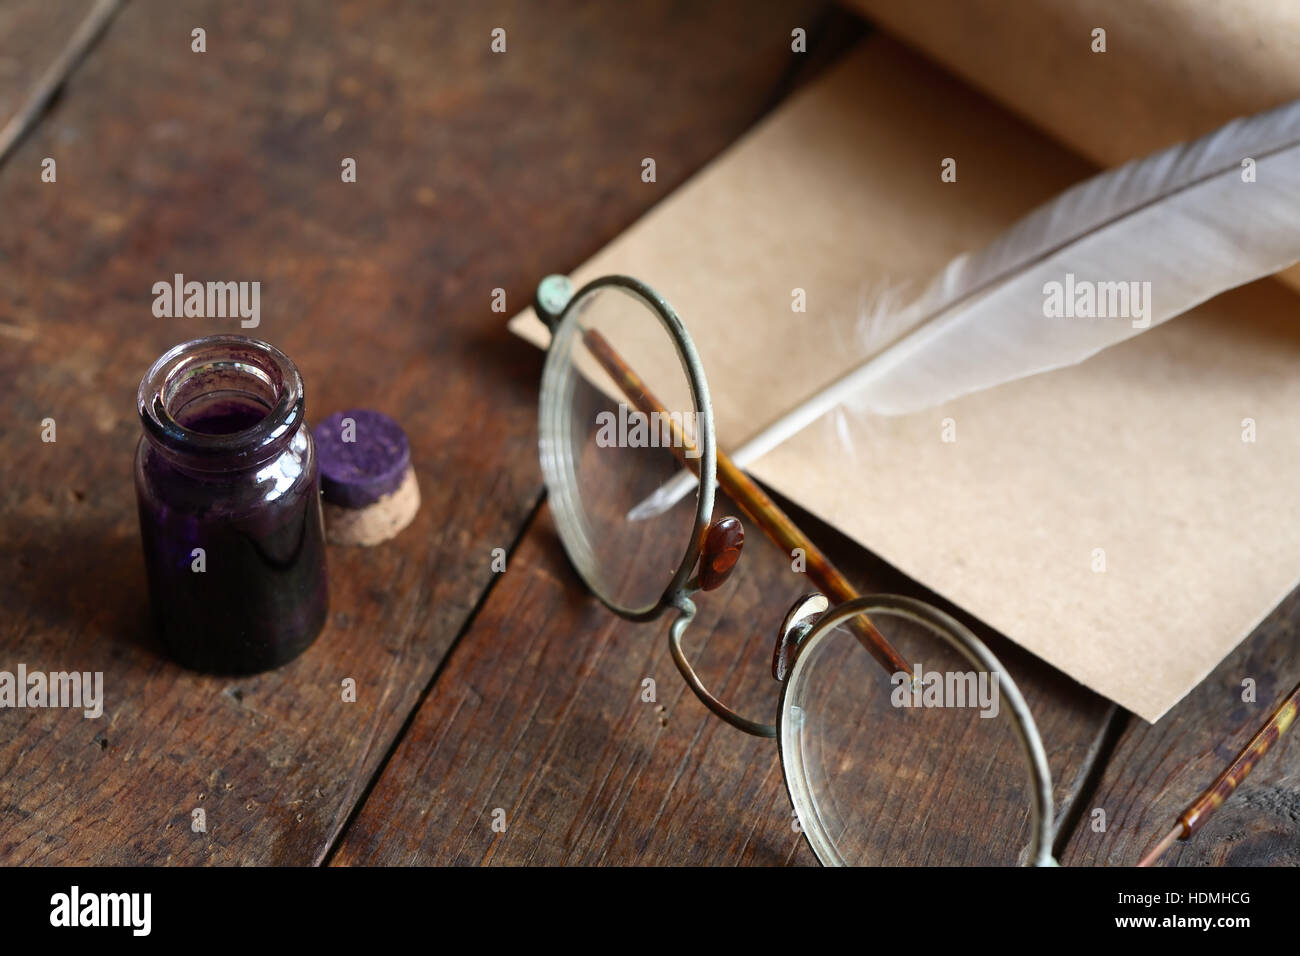 Paper and quill pen near spectacles on nice old wooden background Stock Photo